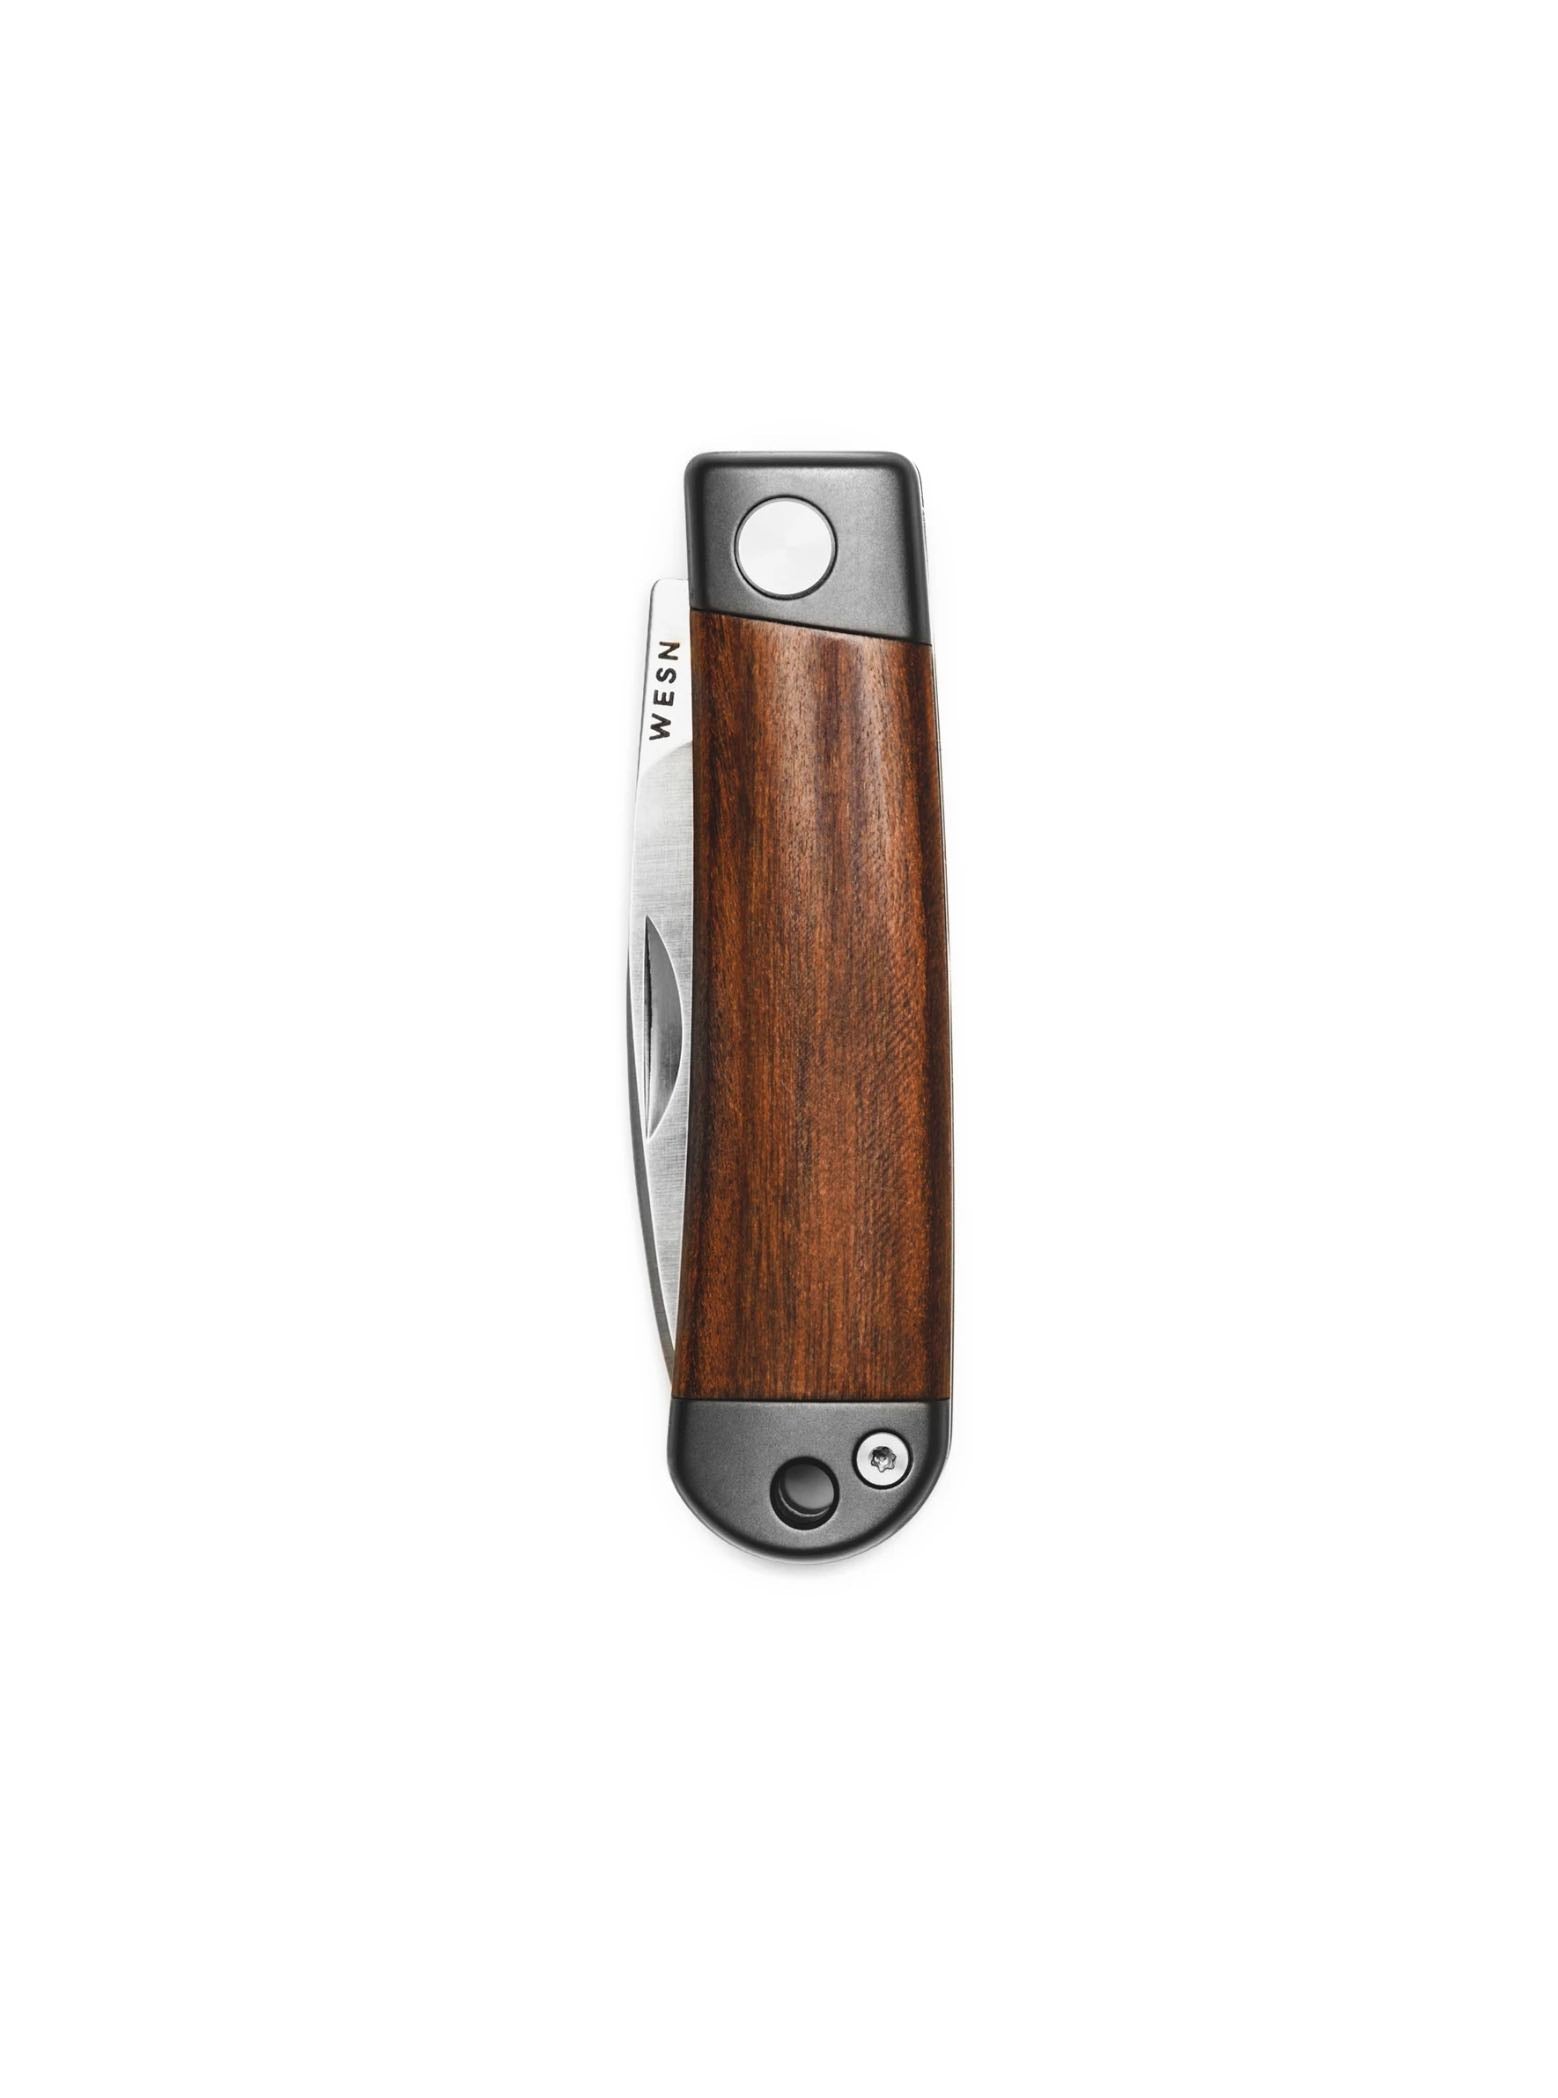 WESN The Henry in Cherry Wood with Leather Sheath